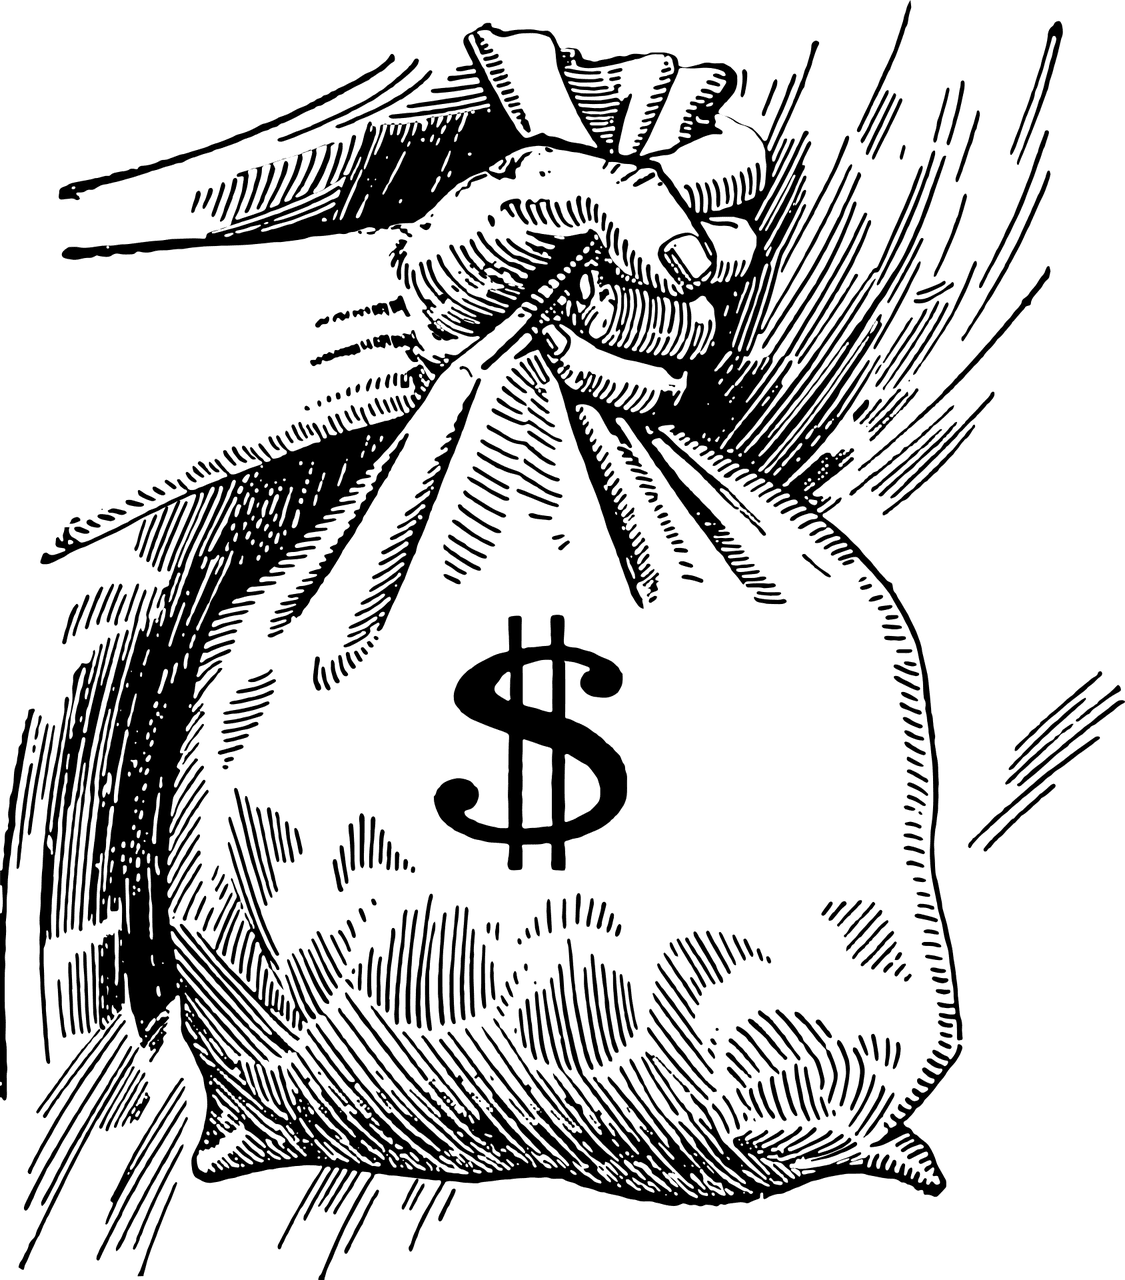 He wanted what most people want - more money! | Photo: Pixabay/StarGladeVintage 